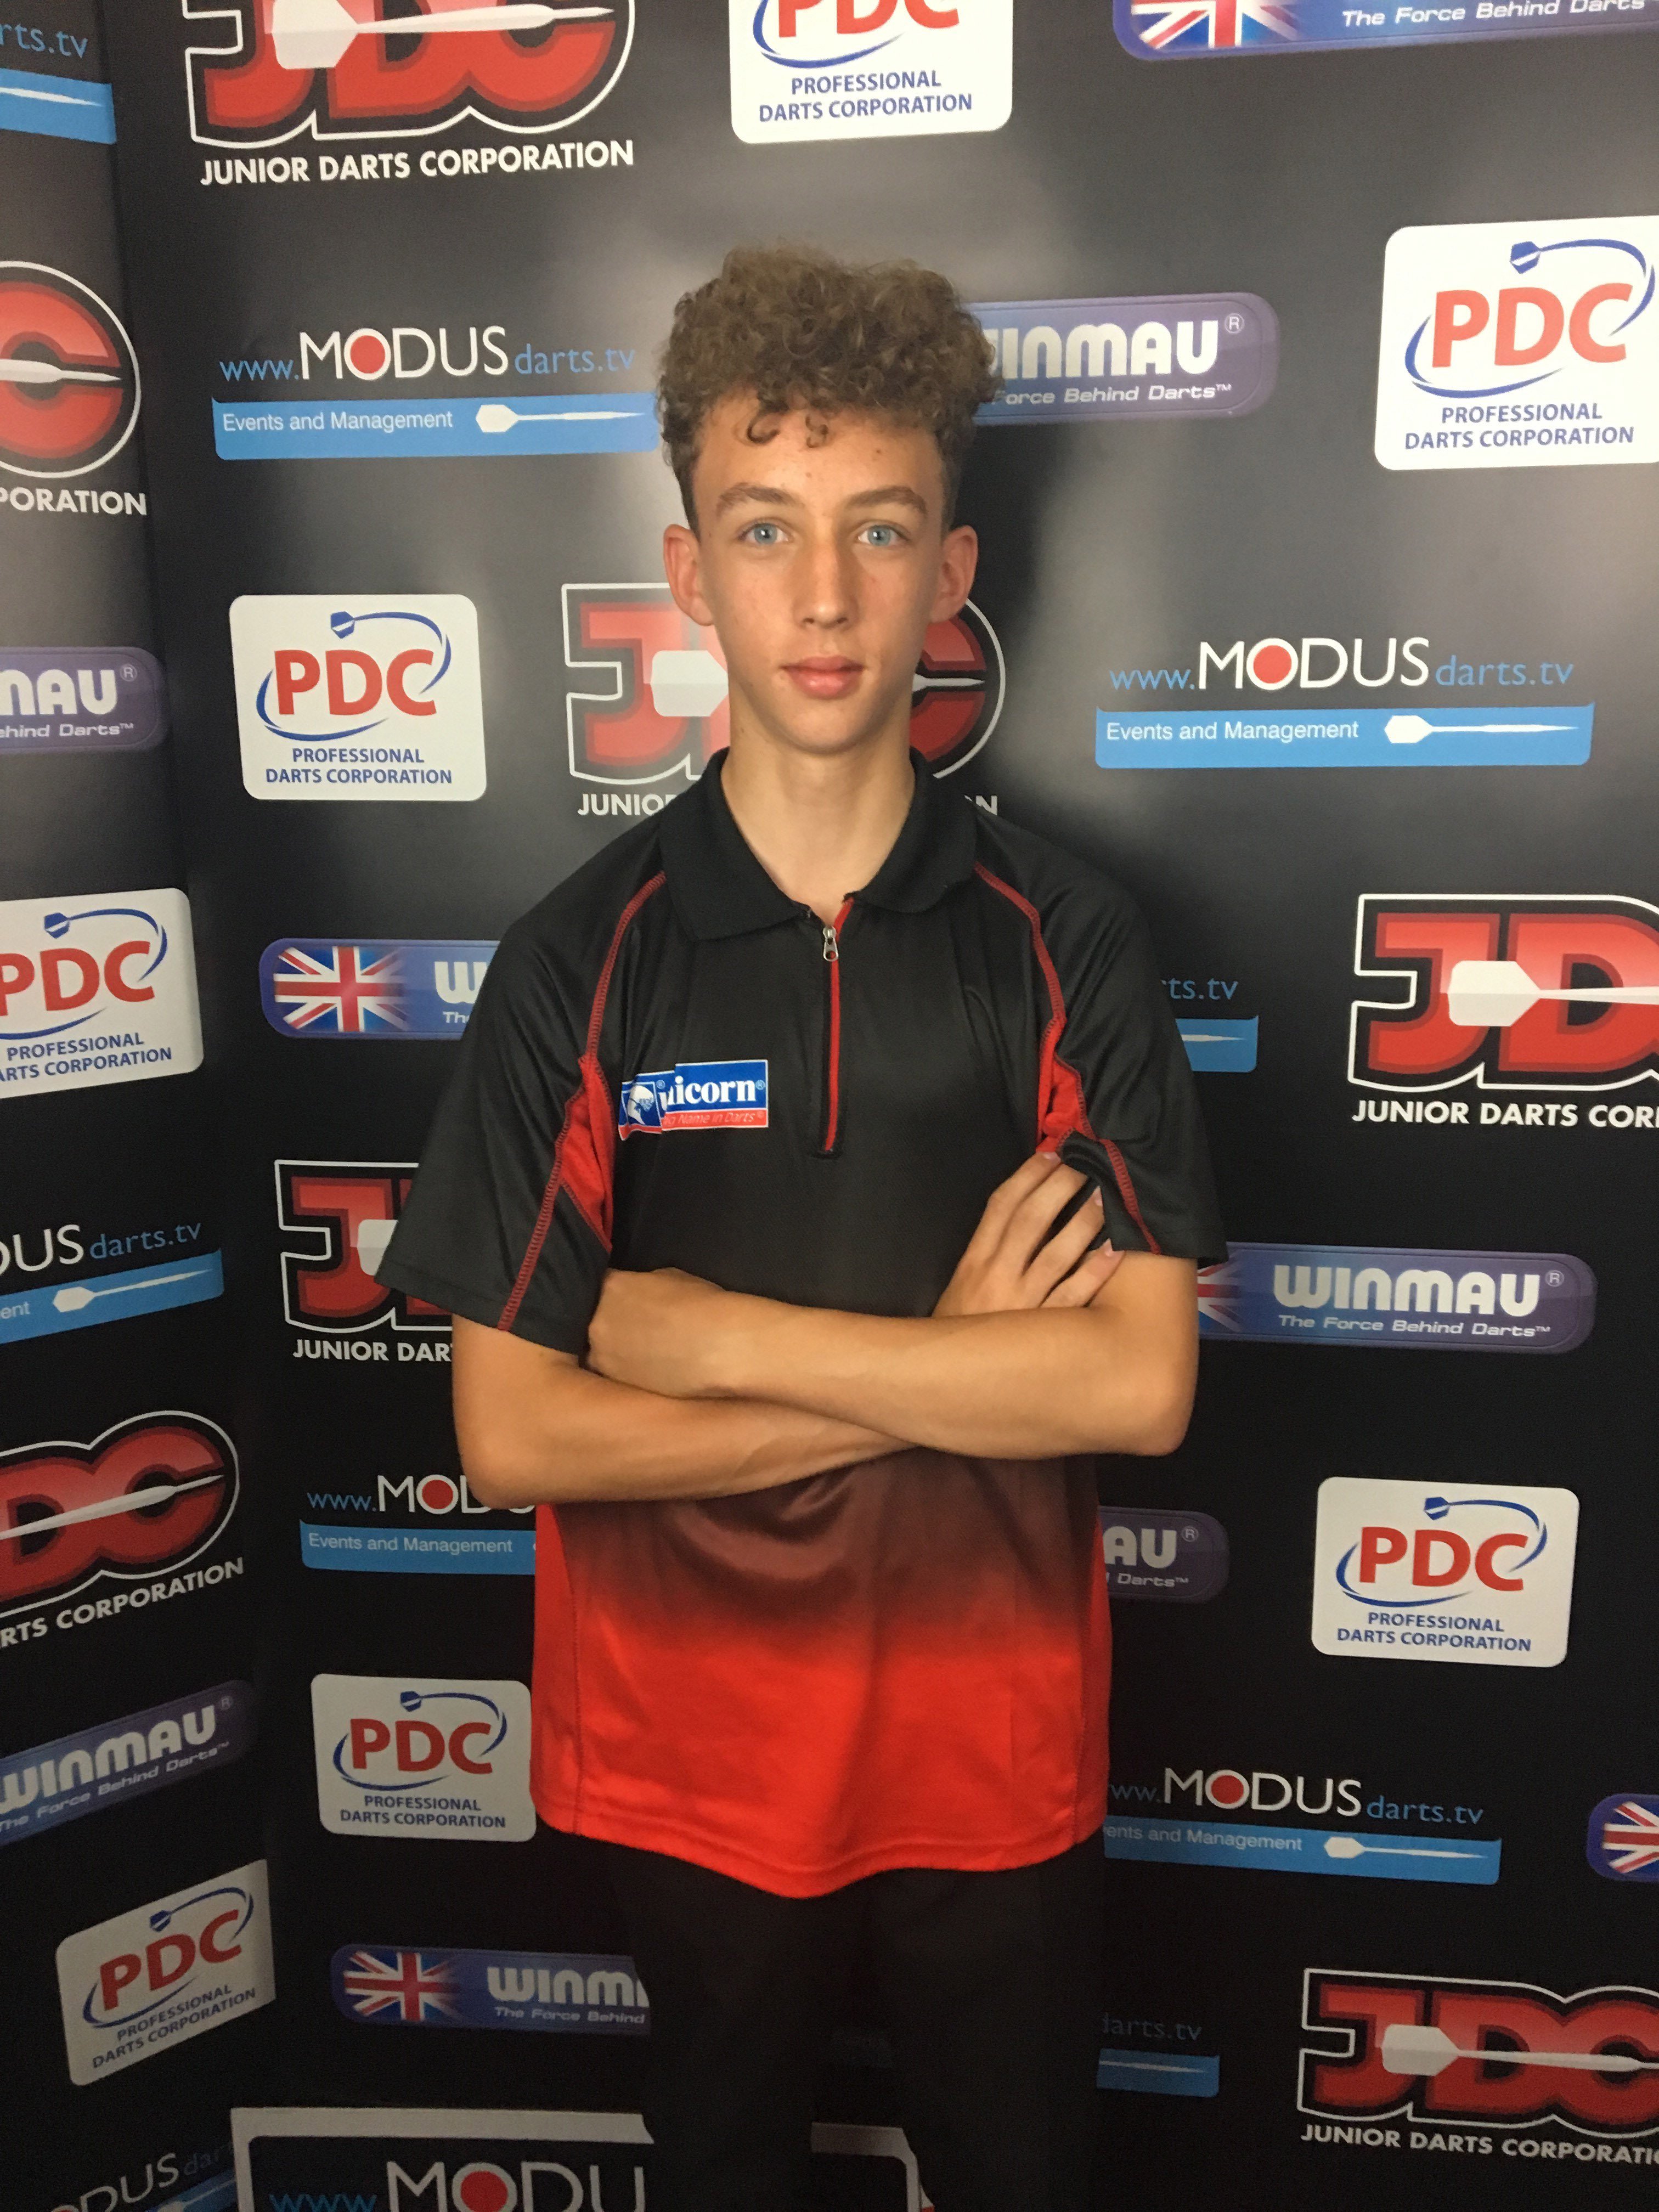 tilgive blød Kompatibel med PDC Darts on Twitter: "Congratulations to Kyle Manton who picked up his  maiden @JDCdarts title at Rileys Chorlton at the weekend! ▶️ Full round-up  and results: https://t.co/xcCDmneVeM https://t.co/9WZCmgA8eE" / Twitter